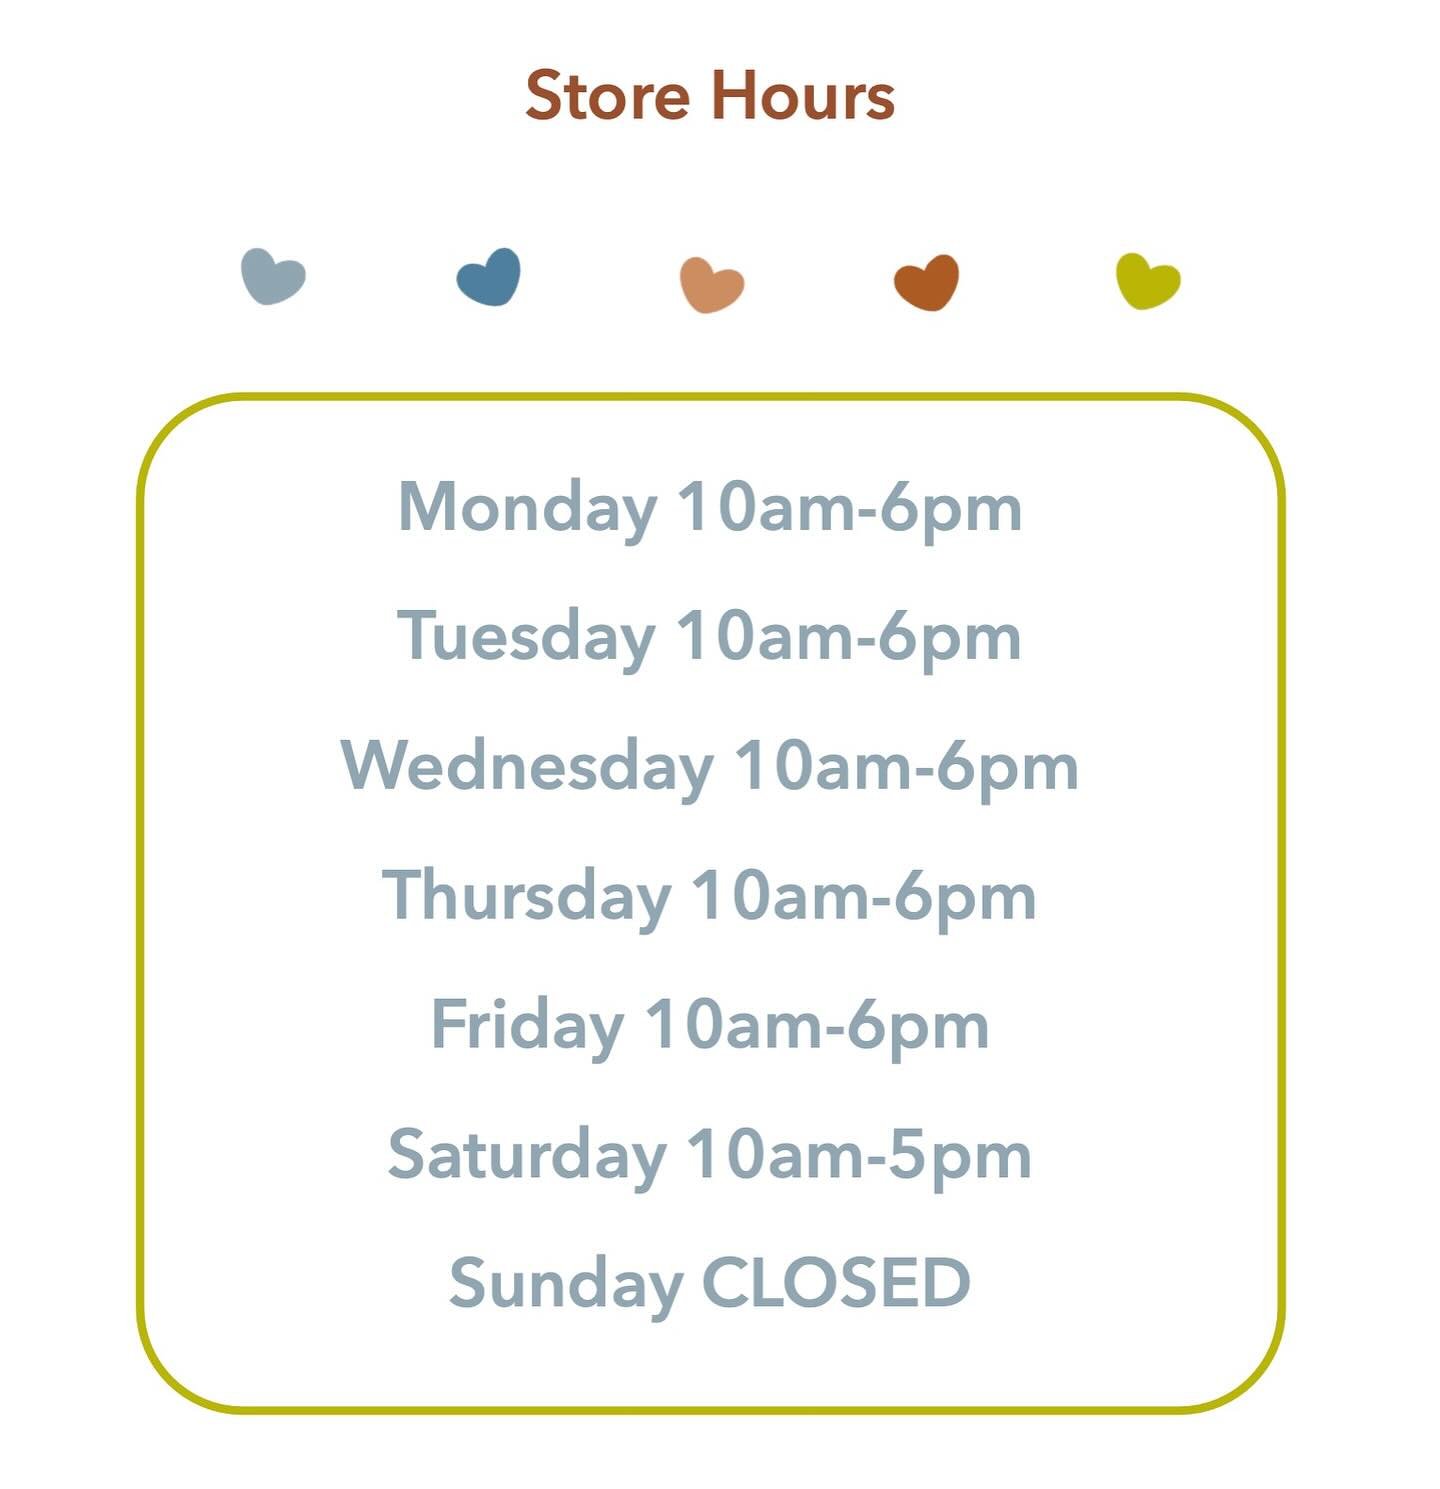 Please note new store hours. 

#love #education #support #fundraising  #socialgood #rdogood #ngo #change #givingback #philanthropy #help #fundraiser #makeadifference #instagood #donation #smallbatchkitchen #shoplocal